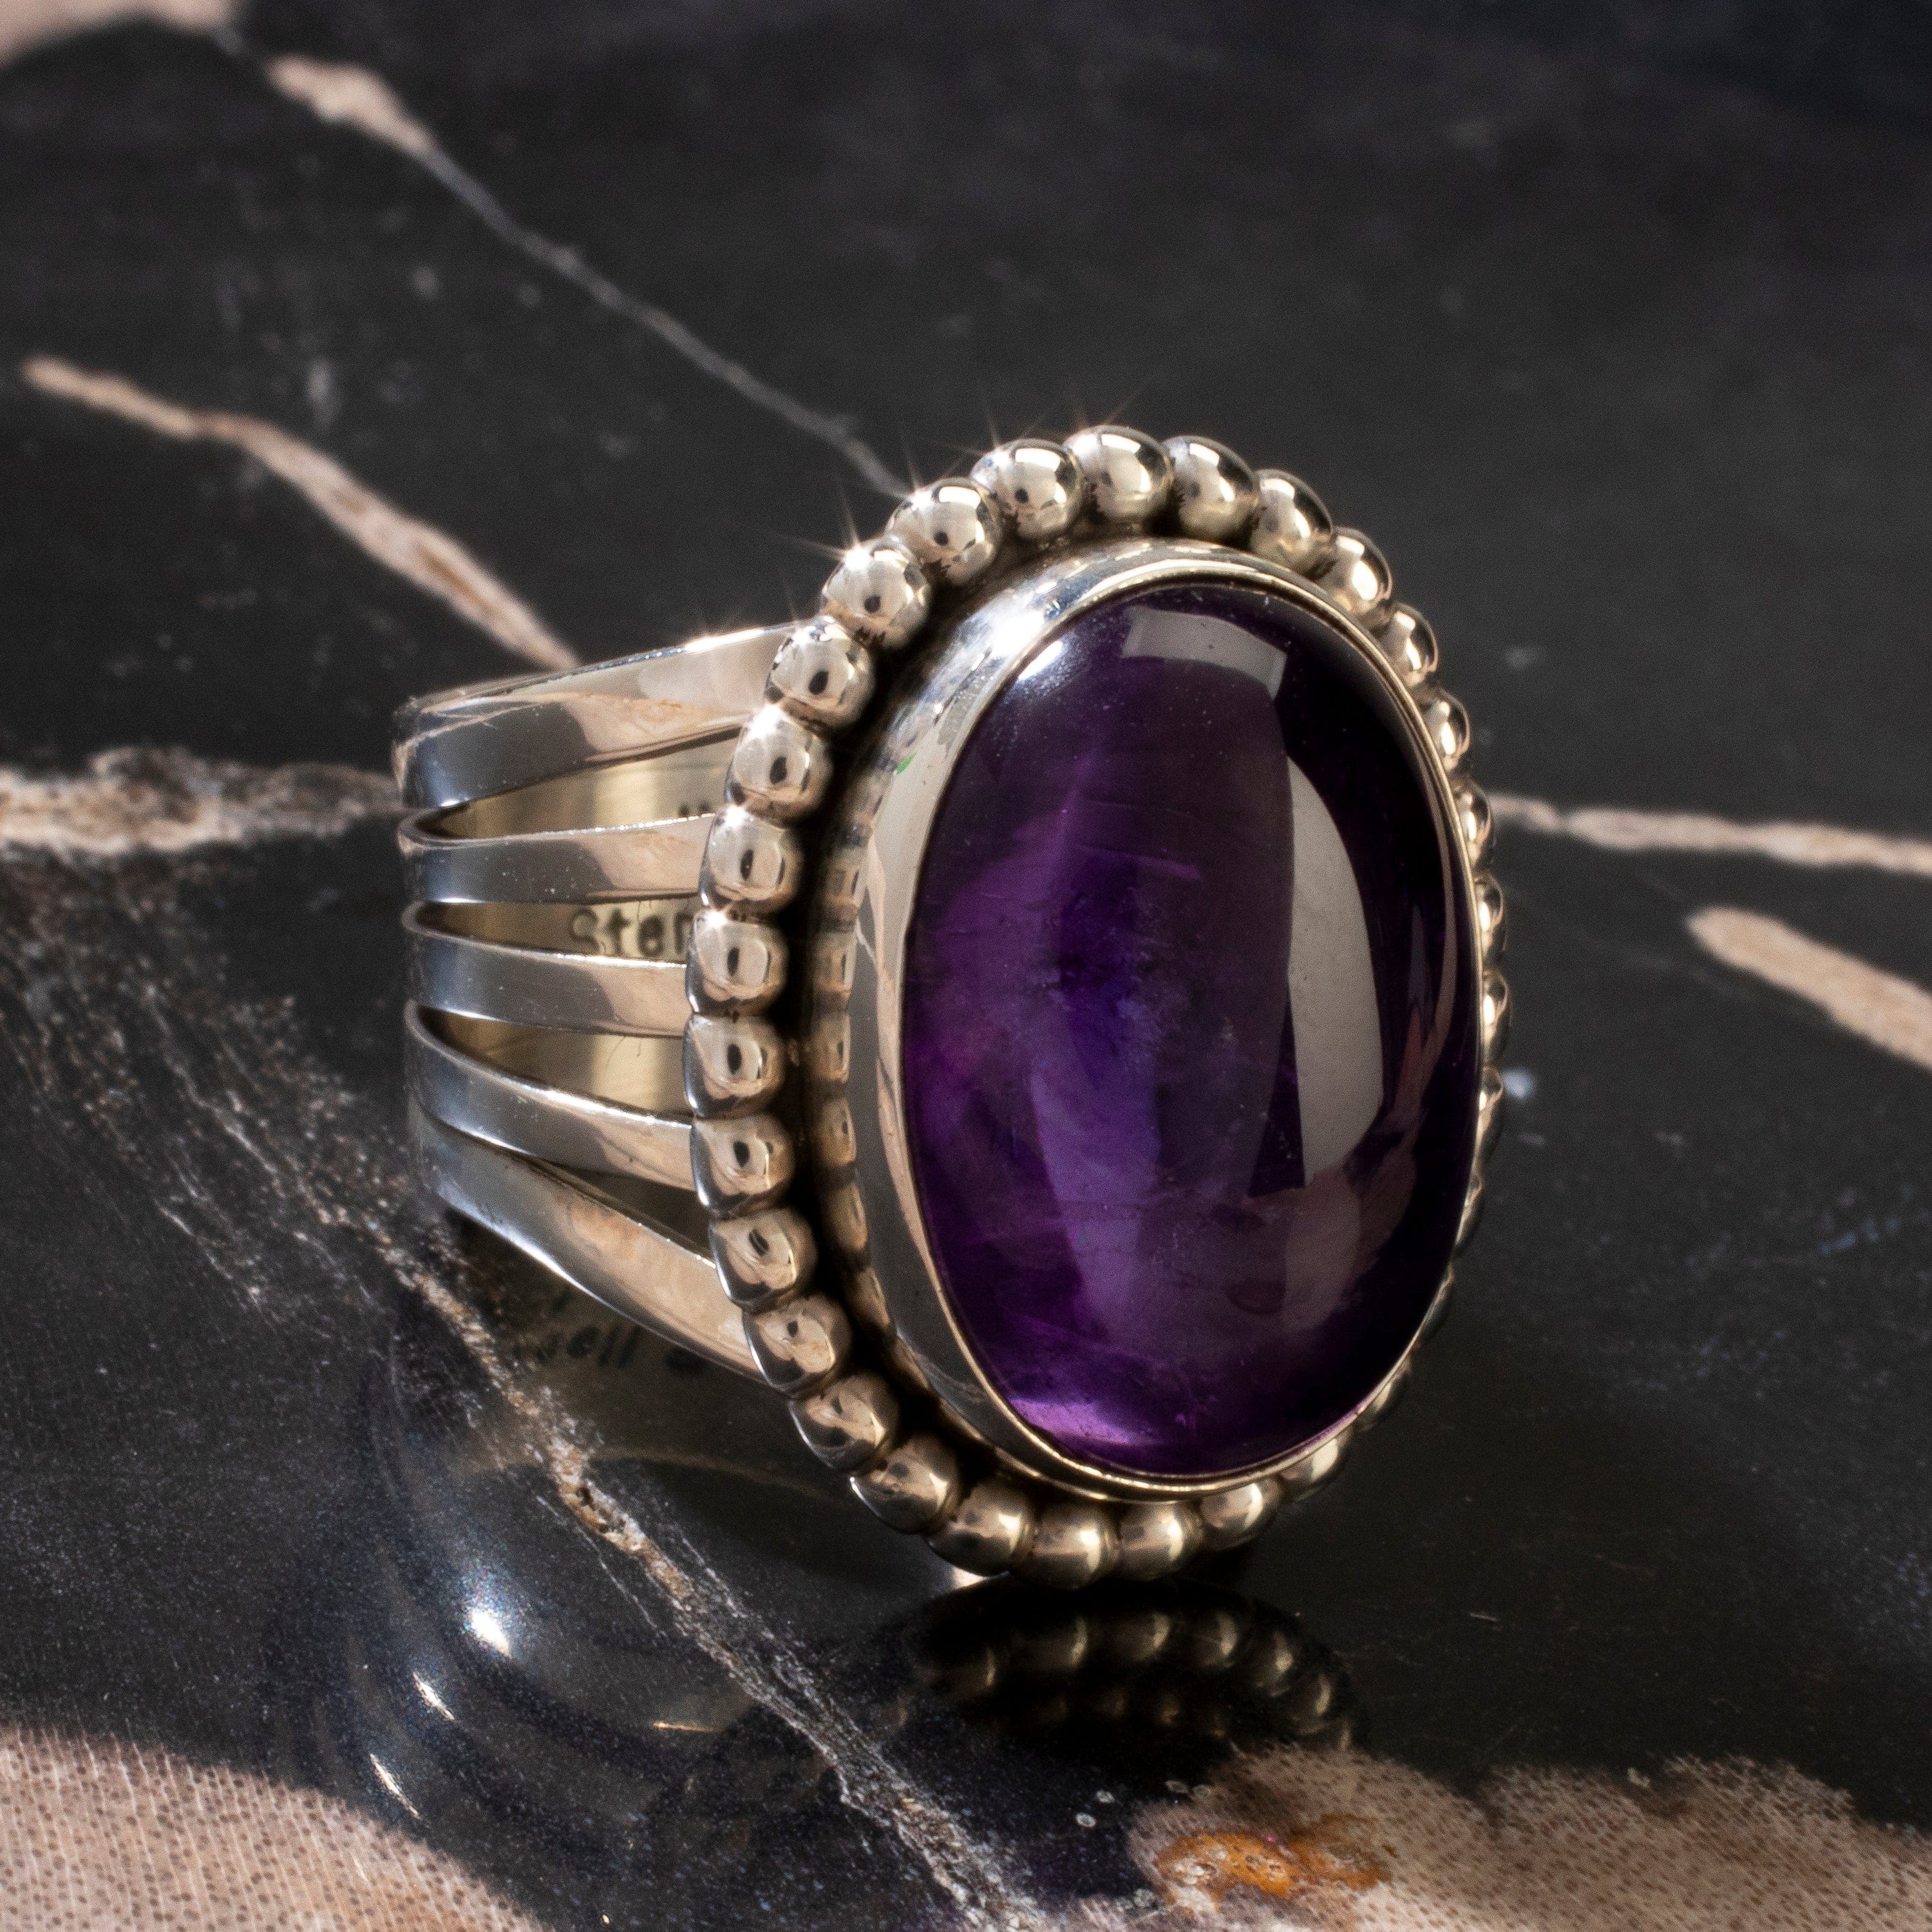 Kalifano Native American Jewelry 5 Russell Sam Amethyst Cabochon Navajo USA Native American Made 925 Sterling Silver Ring NAR600.081.5